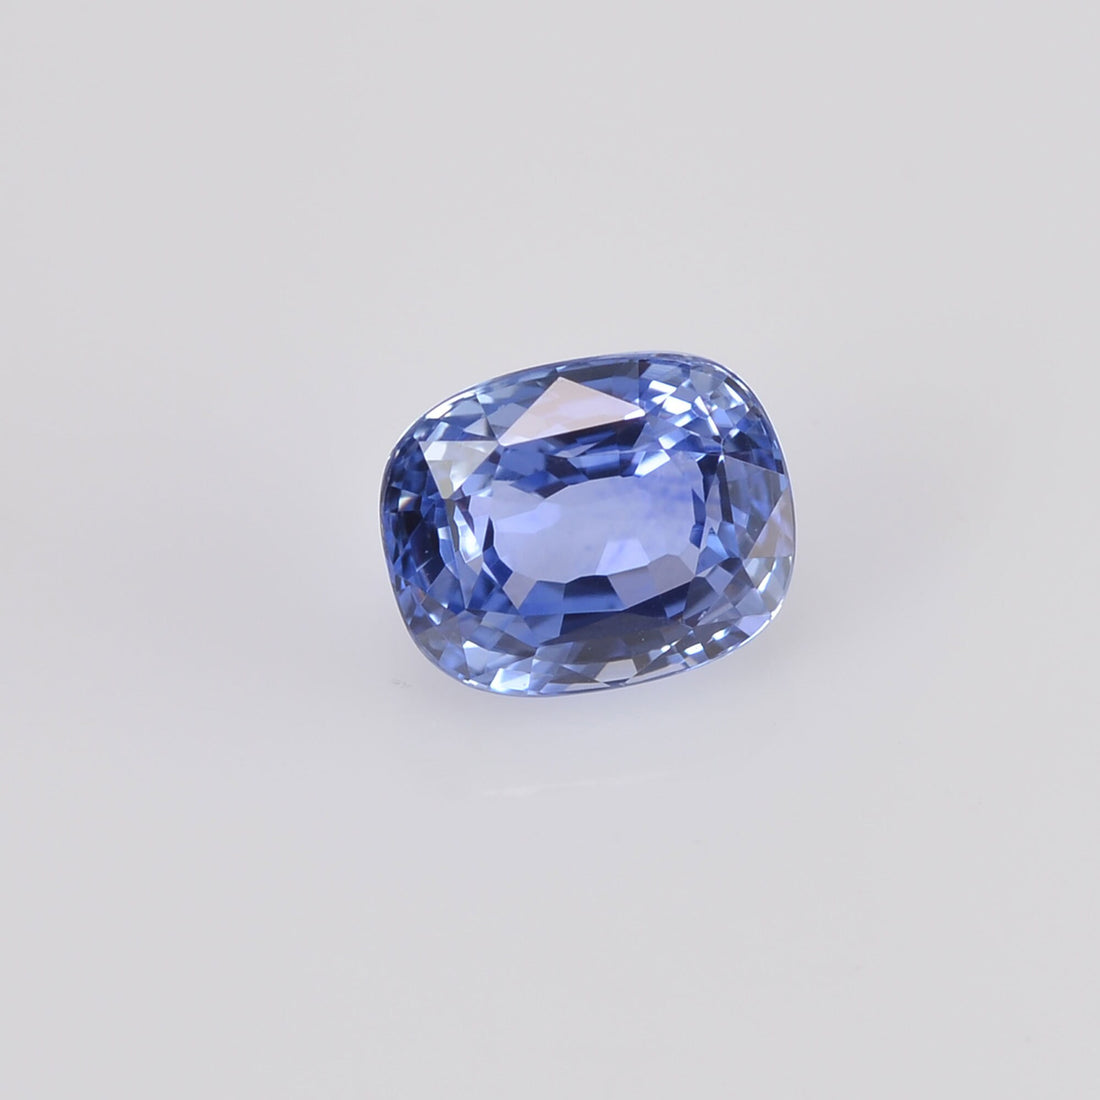 1.16 cts Natural Blue Sapphire Loose Gemstone Cushion Cut Certified